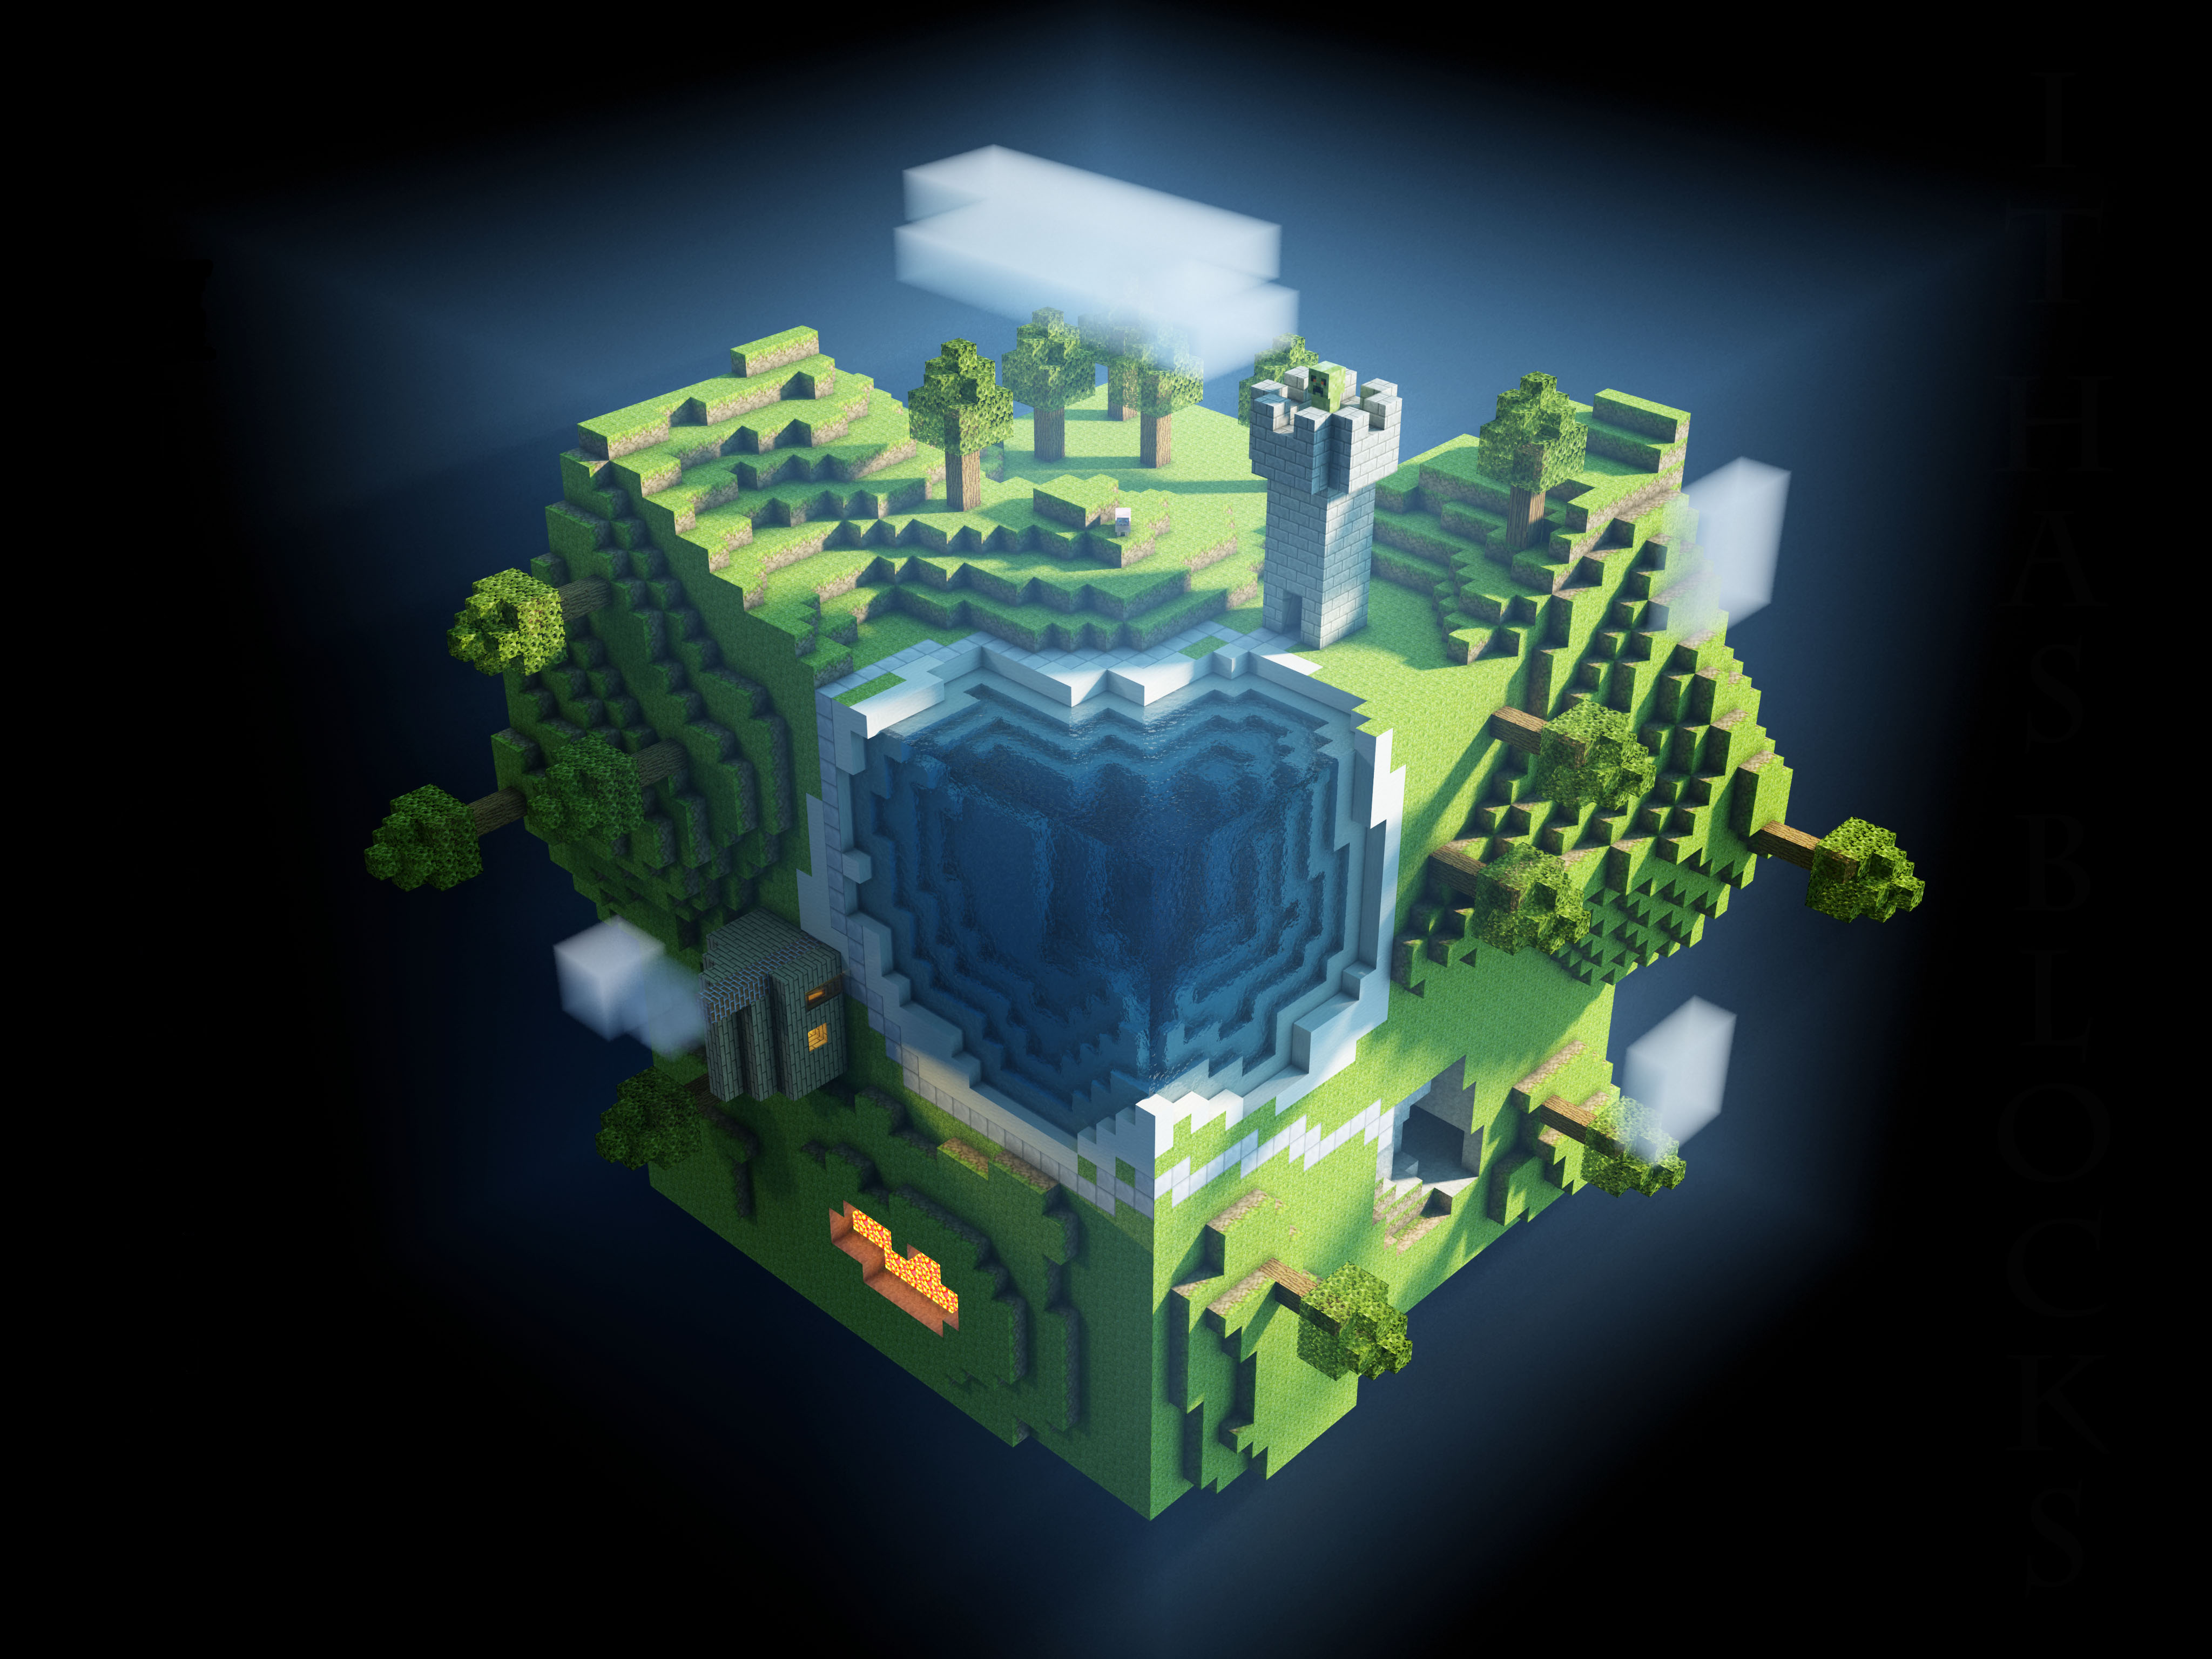 Collection of Cool Hd Minecraft Wallpapers on HDWallpapers